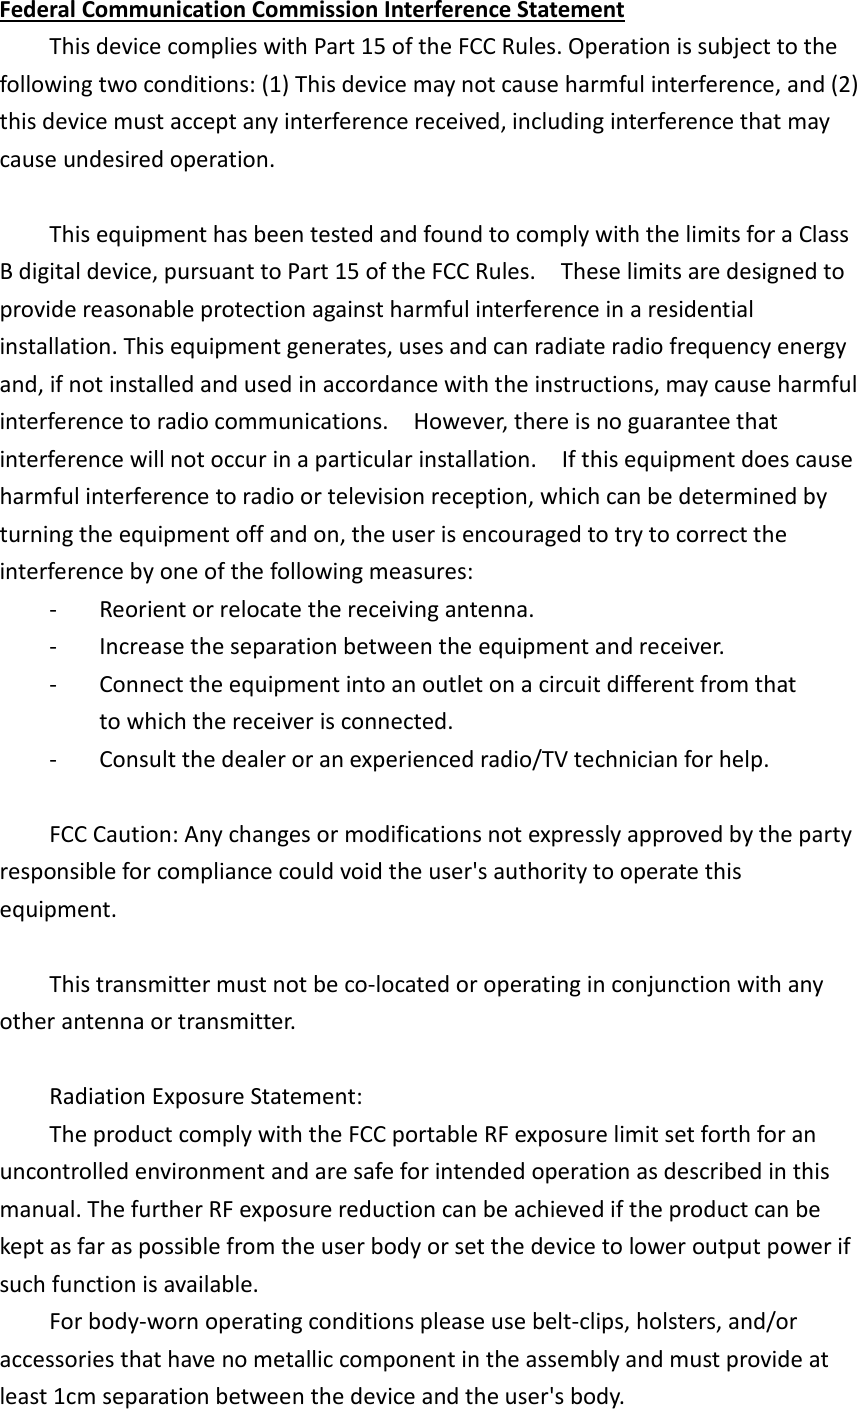 Federal Communication Commission Interference Statement   This device complies with Part 15 of the FCC Rules. Operation is subject to the following two conditions: (1) This device may not cause harmful interference, and (2) this device must accept any interference received, including interference that may cause undesired operation.      This equipment has been tested and found to comply with the limits for a Class B digital device, pursuant to Part 15 of the FCC Rules.    These limits are designed to provide reasonable protection against harmful interference in a residential installation. This equipment generates, uses and can radiate radio frequency energy and, if not installed and used in accordance with the instructions, may cause harmful interference to radio communications.    However, there is no guarantee that interference will not occur in a particular installation.    If this equipment does cause harmful interference to radio or television reception, which can be determined by turning the equipment off and on, the user is encouraged to try to correct the interference by one of the following measures:   -  Reorient or relocate the receiving antenna.   -  Increase the separation between the equipment and receiver.   -  Connect the equipment into an outlet on a circuit different from that           to which the receiver is connected.   -  Consult the dealer or an experienced radio/TV technician for help.      FCC Caution: Any changes or modifications not expressly approved by the party responsible for compliance could void the user&apos;s authority to operate this equipment.      This transmitter must not be co-located or operating in conjunction with any other antenna or transmitter.          Radiation Exposure Statement:   The product comply with the FCC portable RF exposure limit set forth for an uncontrolled environment and are safe for intended operation as described in this manual. The further RF exposure reduction can be achieved if the product can be kept as far as possible from the user body or set the device to lower output power if such function is available.   For body-worn operating conditions please use belt-clips, holsters, and/or   accessories that have no metallic component in the assembly and must provide at   least 1cm separation between the device and the user&apos;s body. 